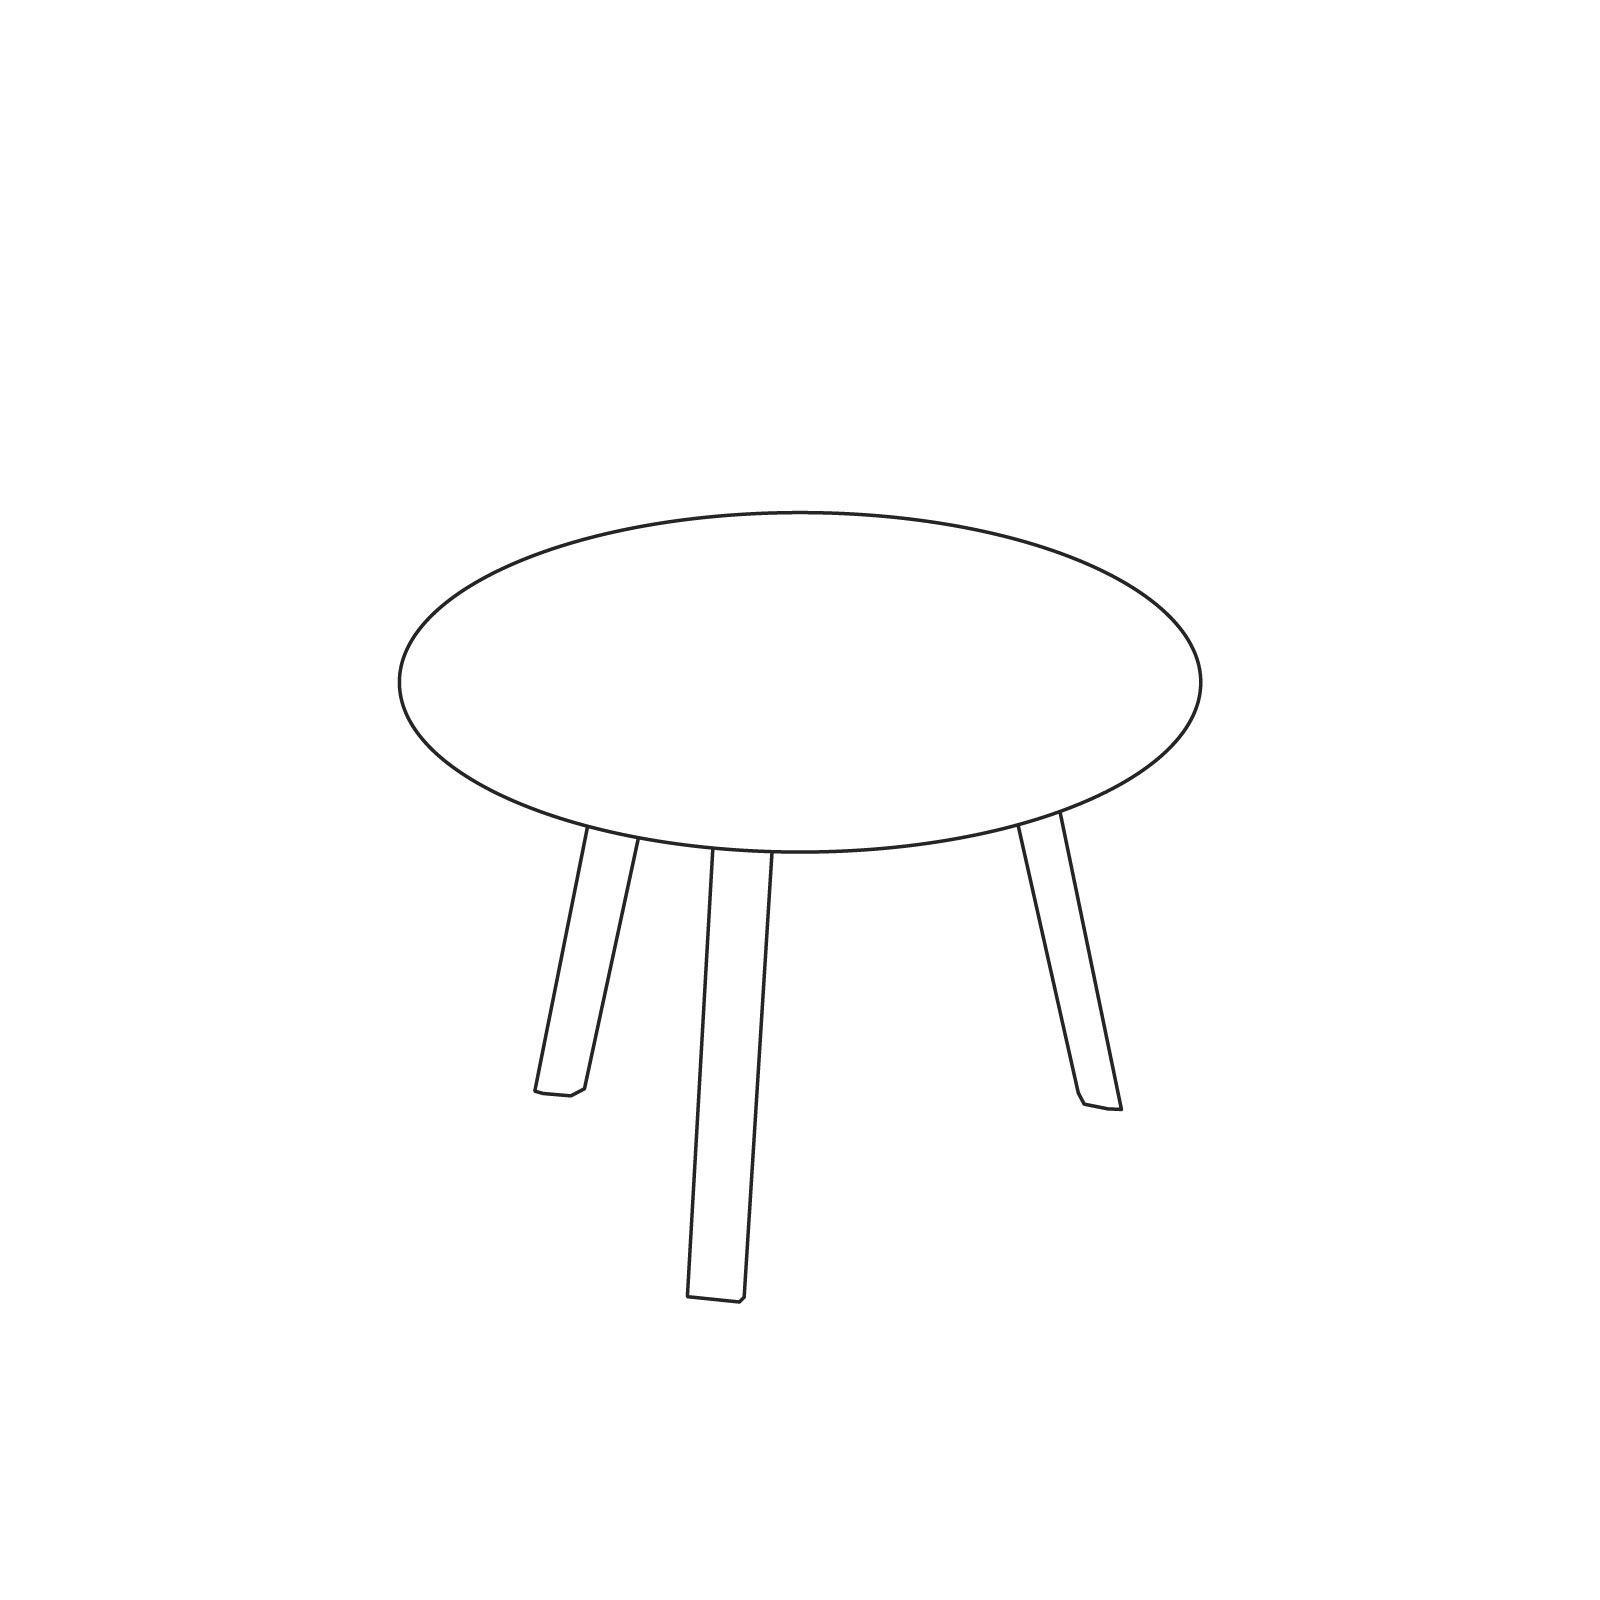 A line drawing of Bella Coffee Table–Low.